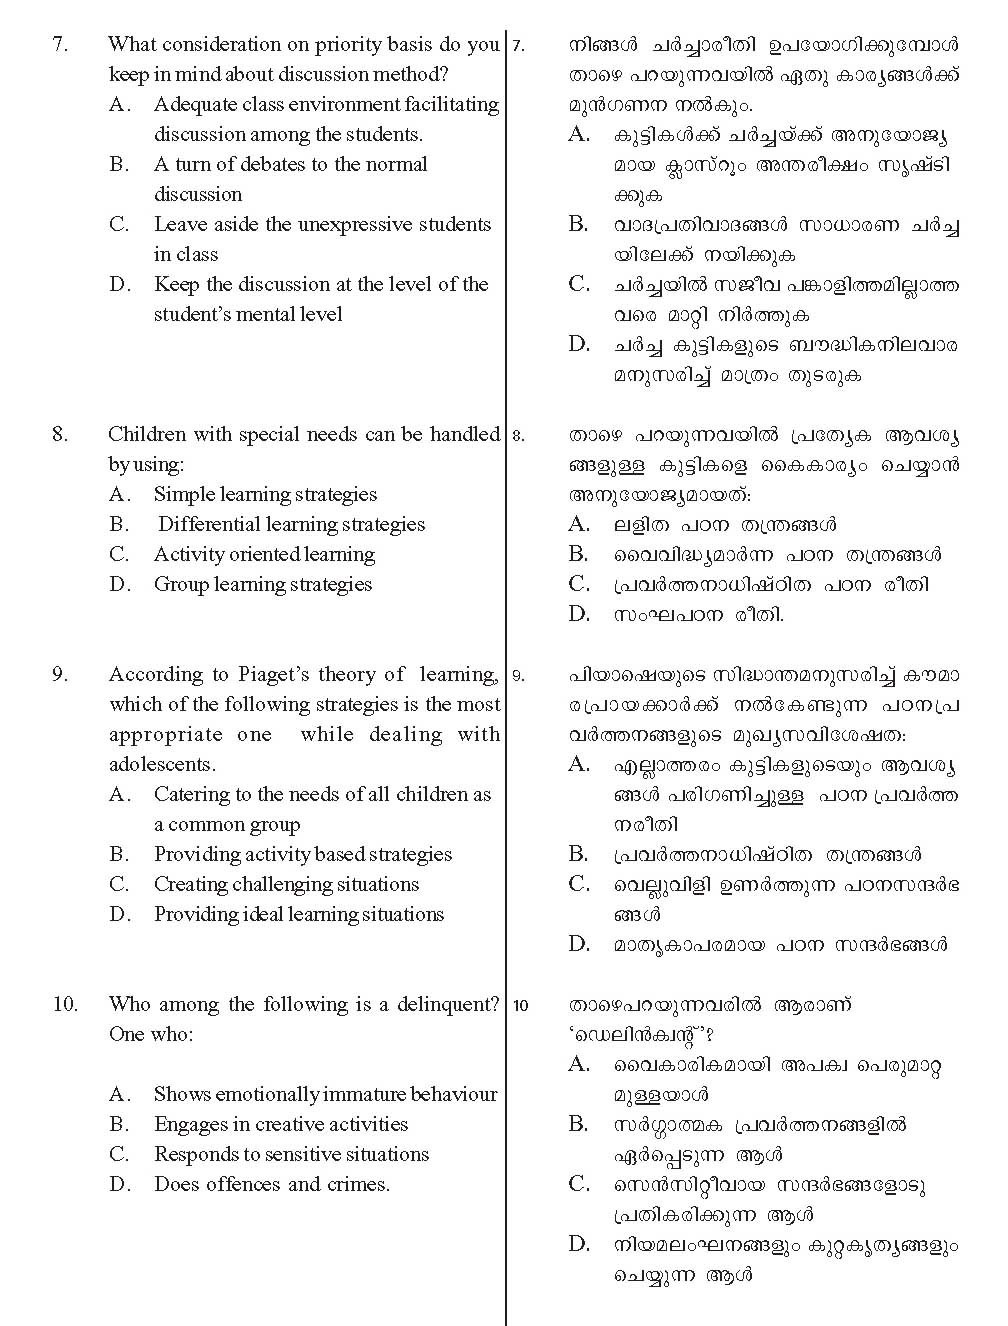 KTET Category III Paper III Adolescent Psychology Question Paper with Answers 2012 3